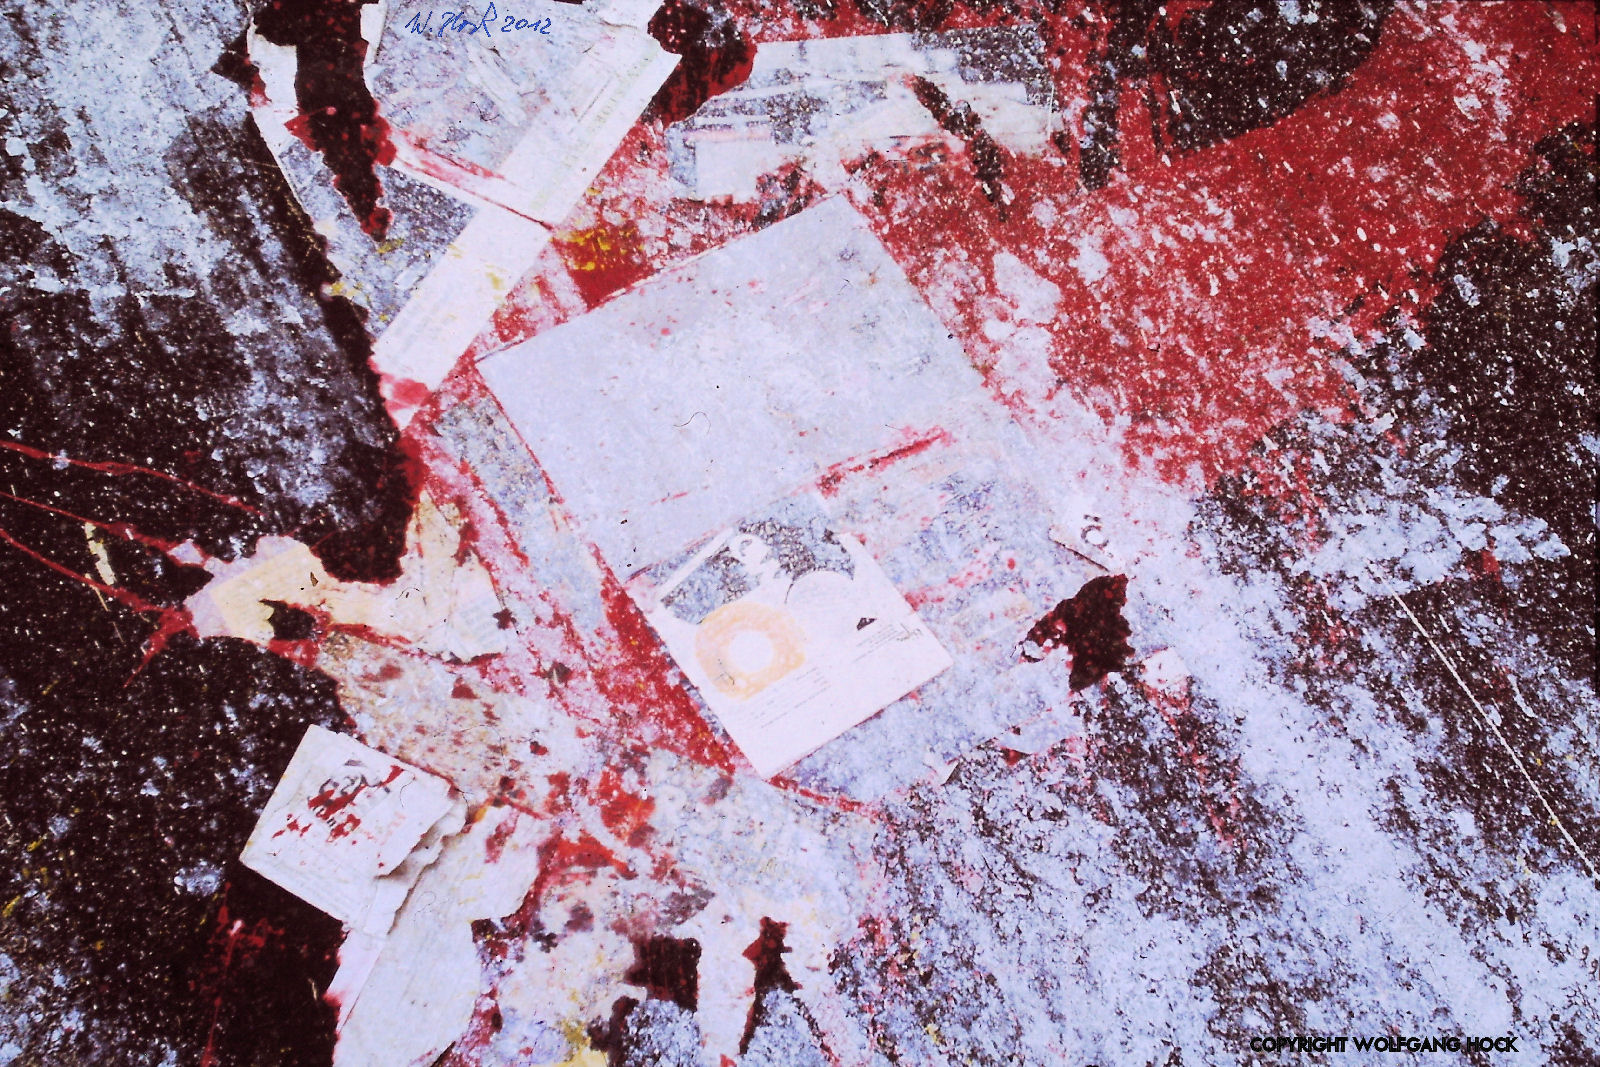 White and red 2012   Inkjet printed photographic mixed media on paper, 67 x 45 cm